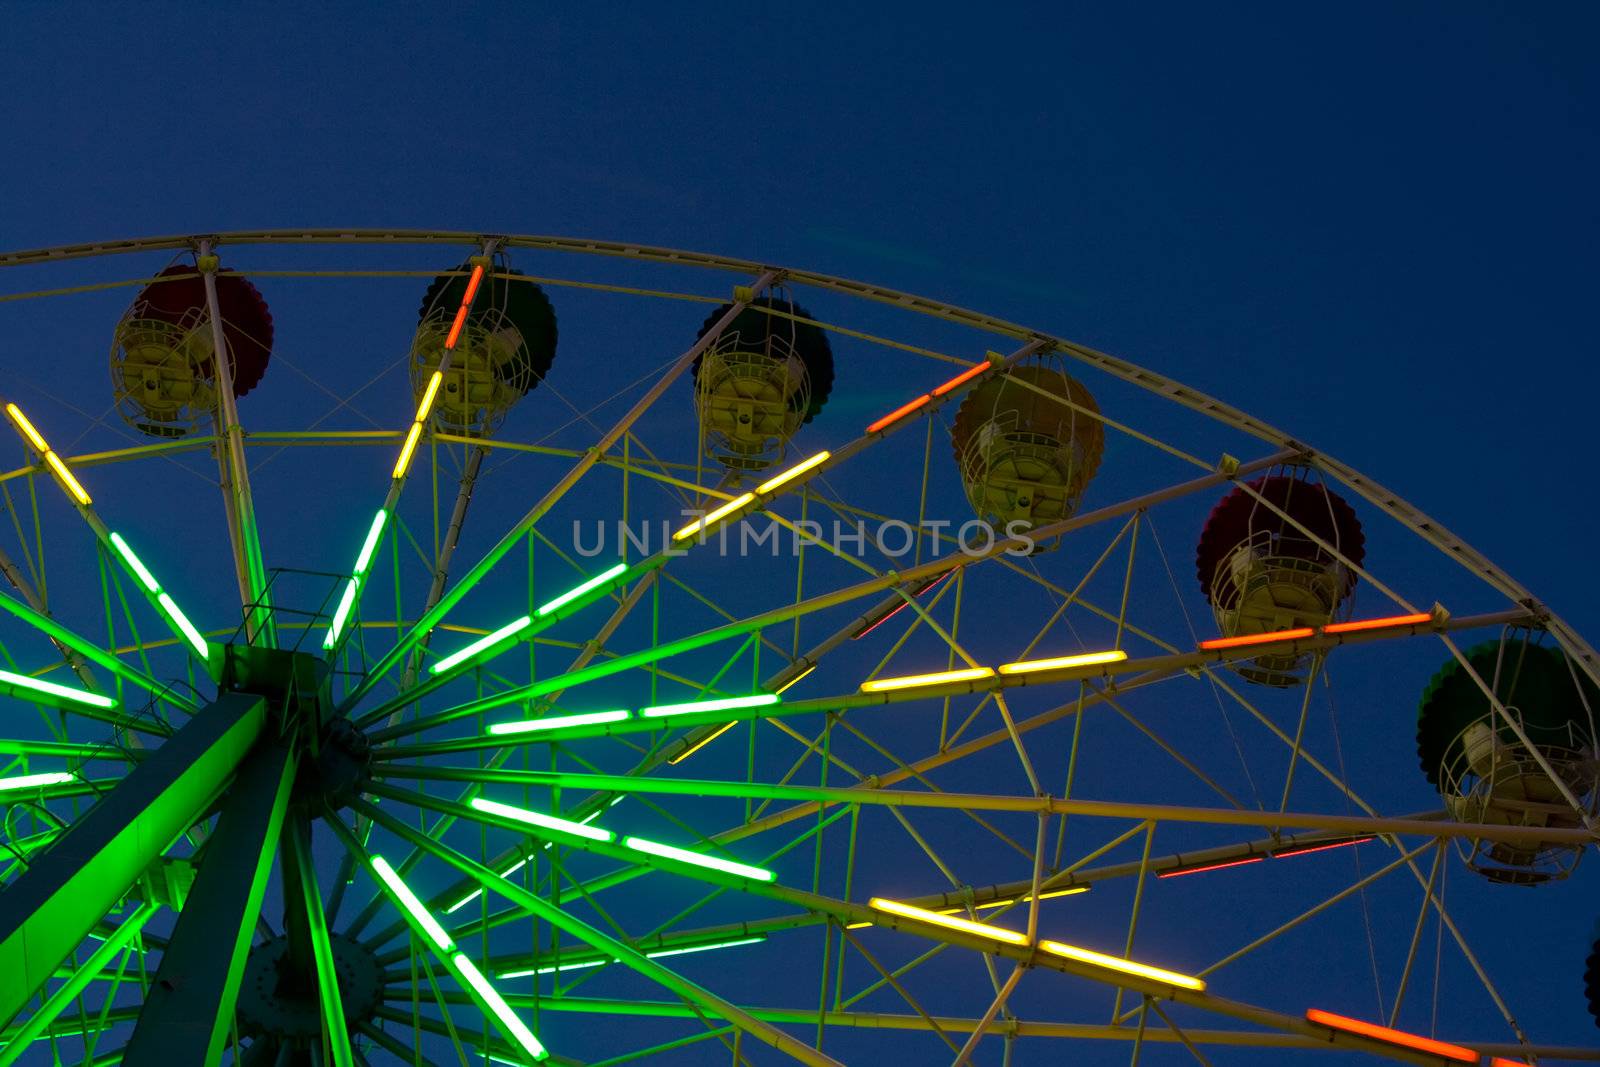 Abstract view of a colourful ferris wheel at night